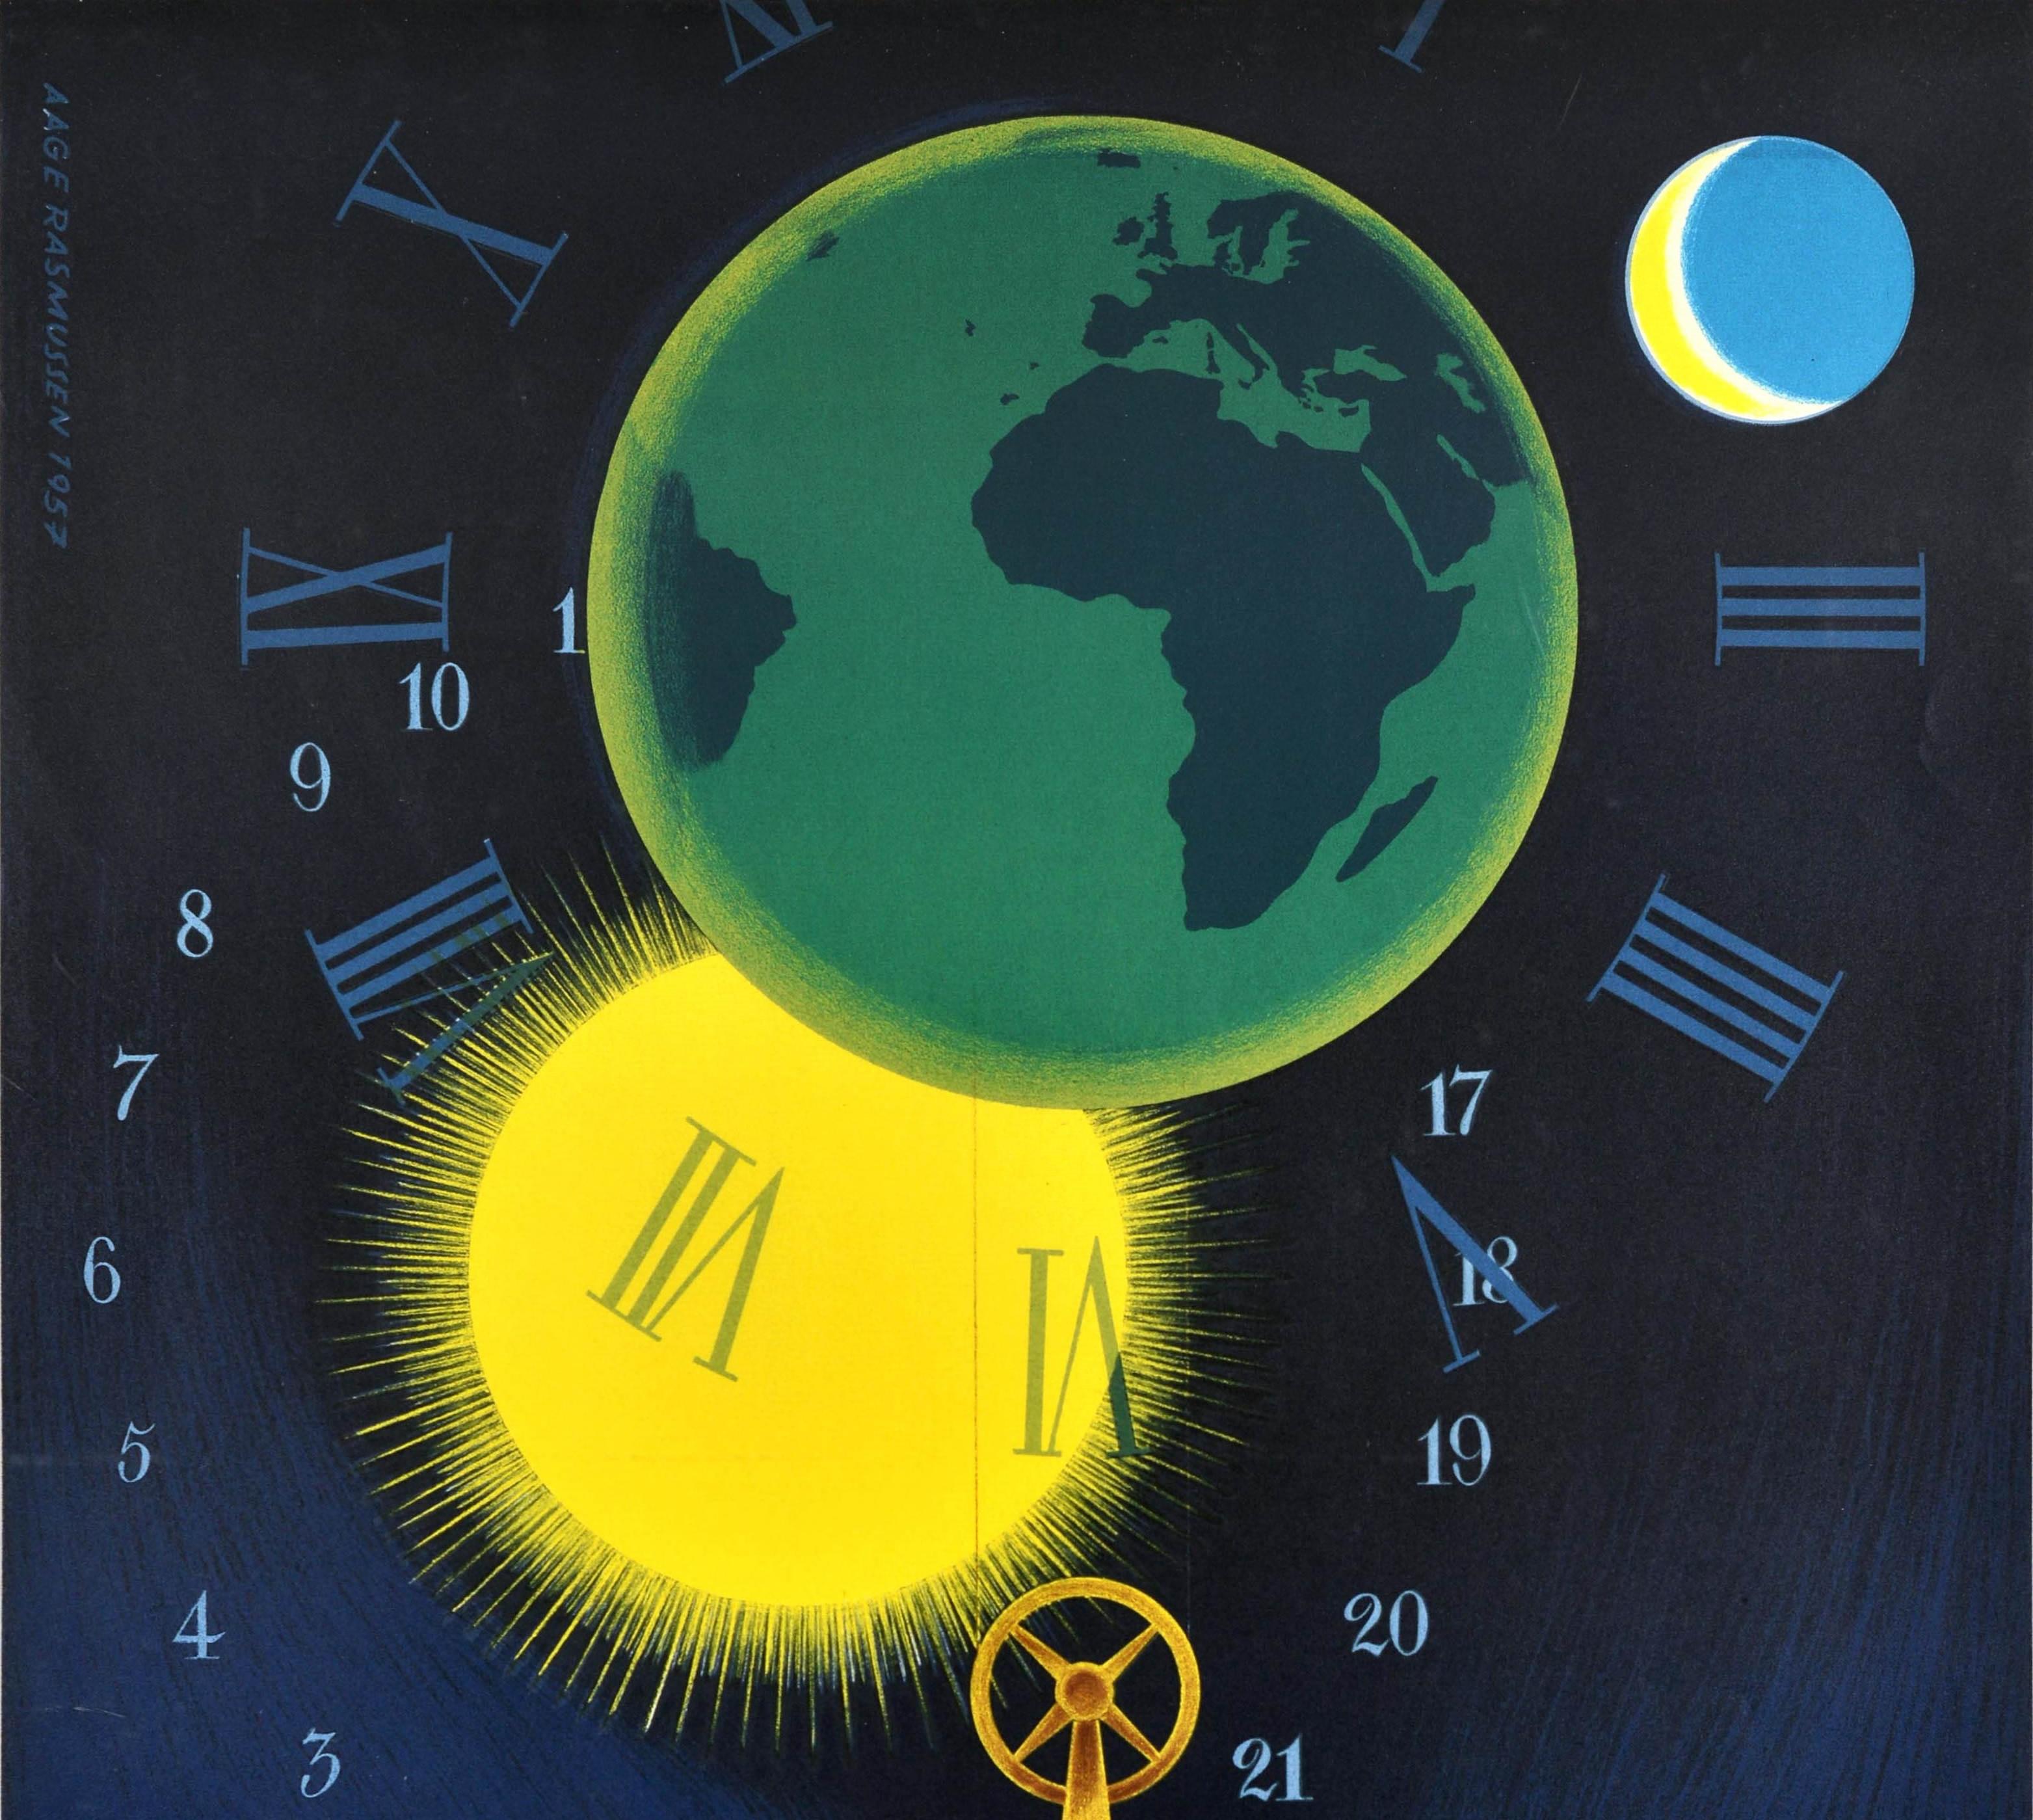 Original vintage travel poster featuring a great illustration by the Danish artist Aage Rasmussen (1889-1983) depicting the astronomical world clock and perpetual calendar designed by the Danish locksmith, clockmaker and astromechanic Jens Olsen